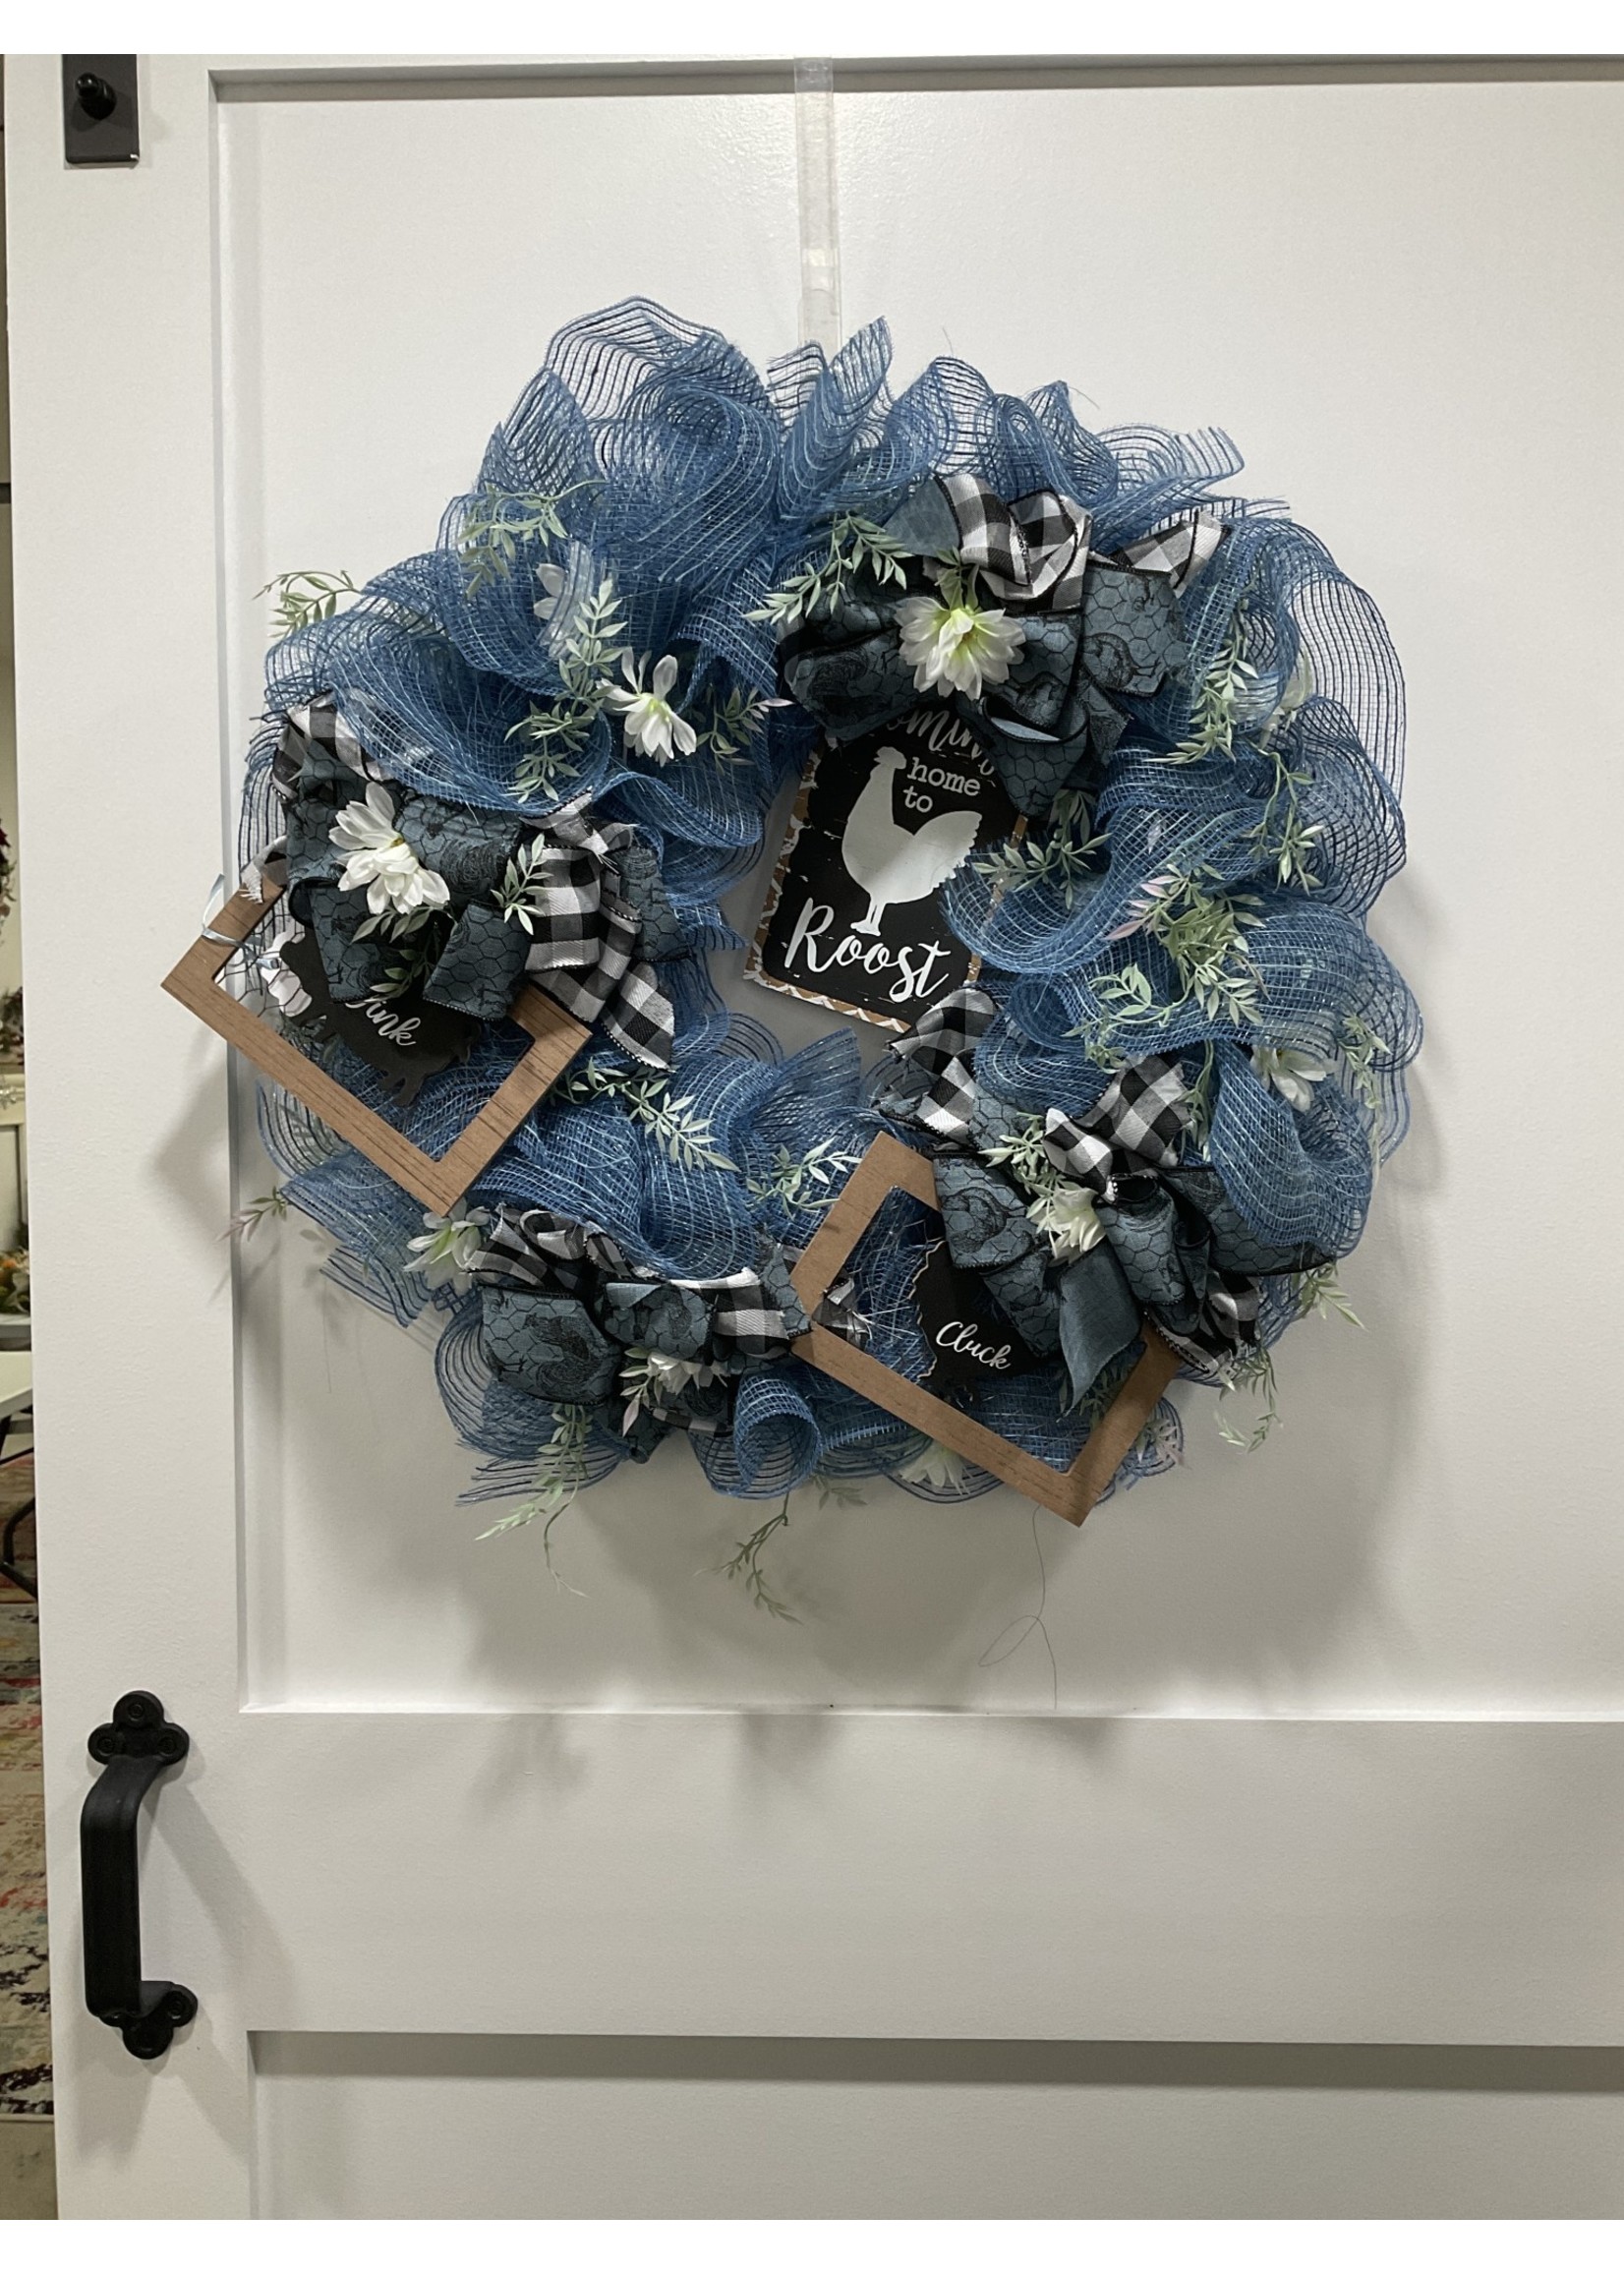 My New Favorite Thing Wreath Mesh 18 in-Blue w/White Flowers "Coming Home to Roost" Black Ribbon